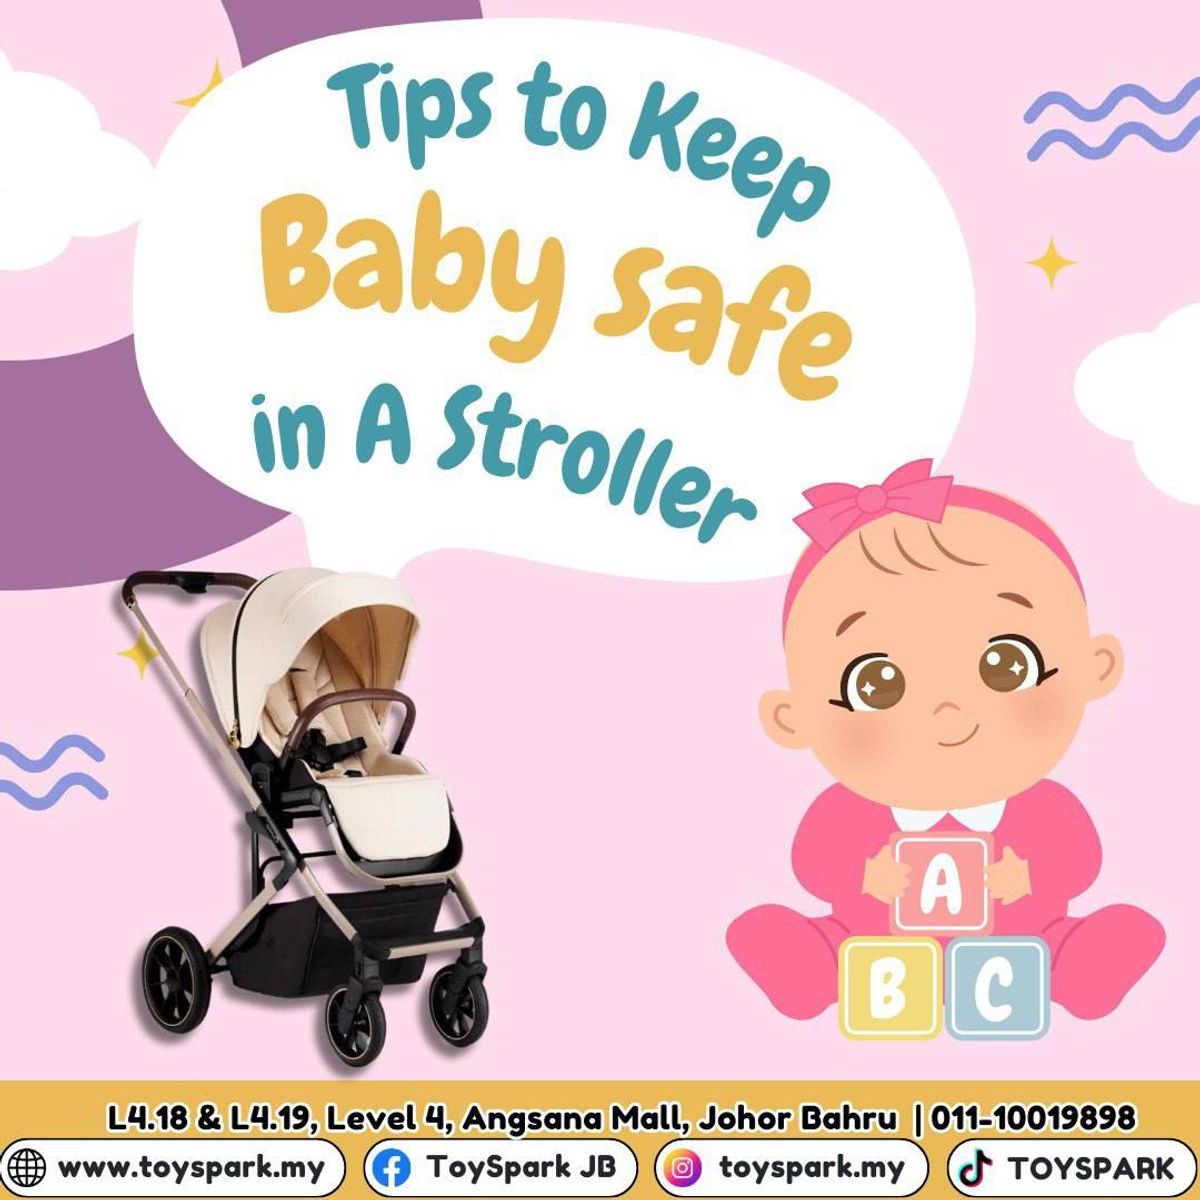 Tips To Keep Baby Safe In a Stroller